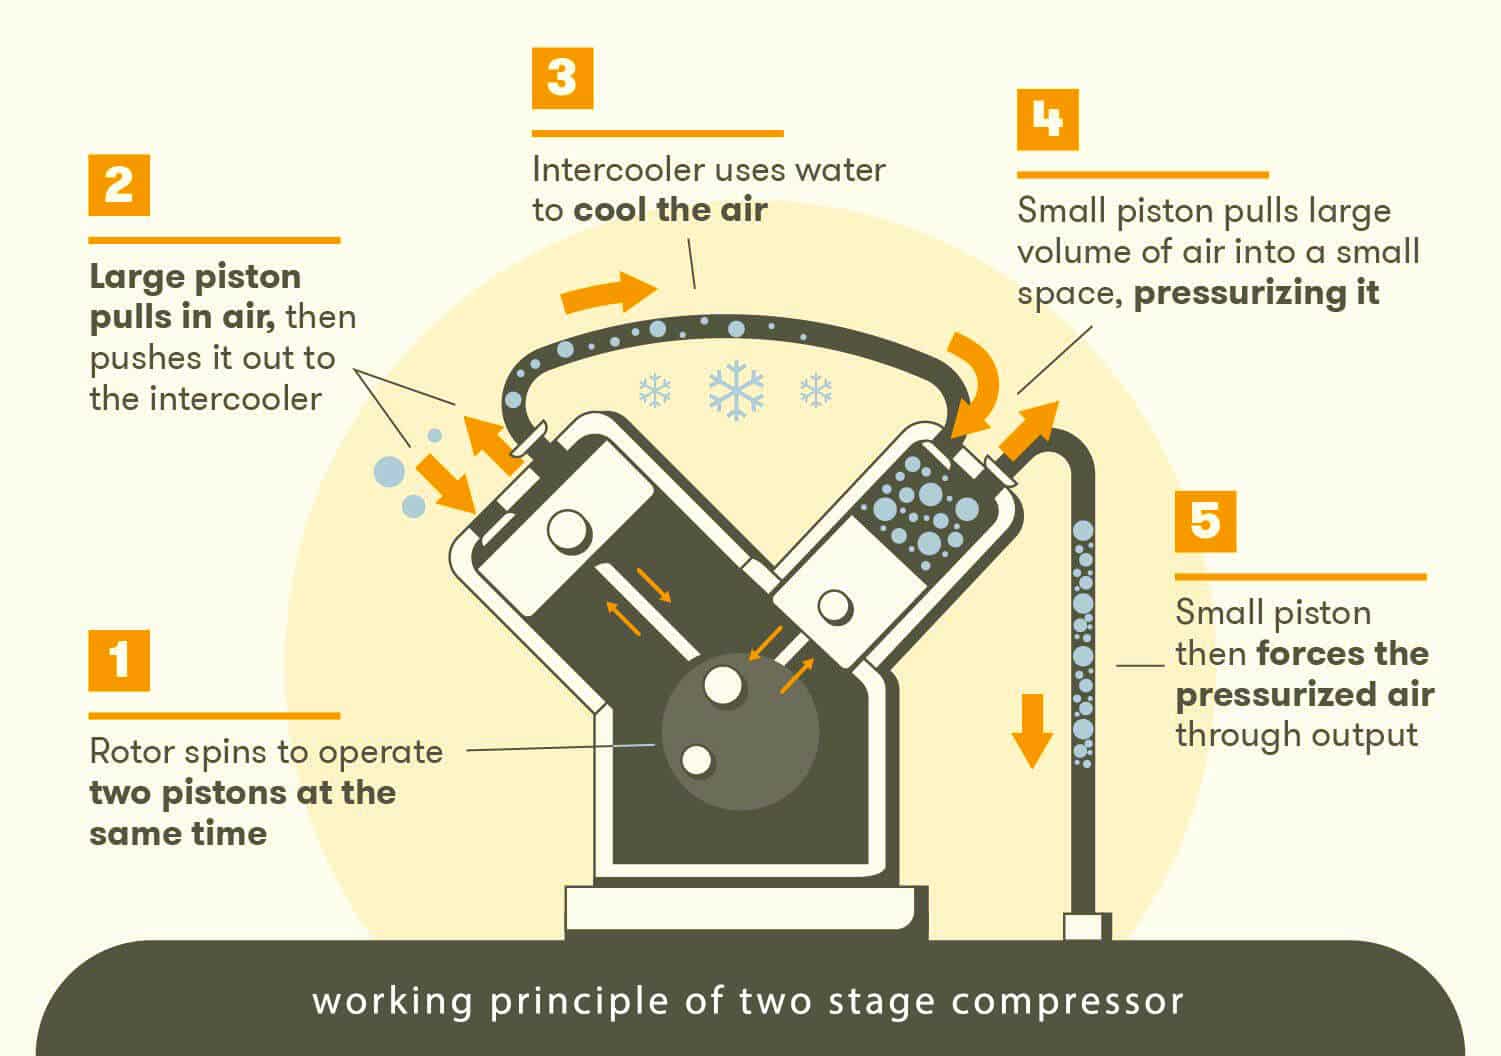 working principle of two stage compressor